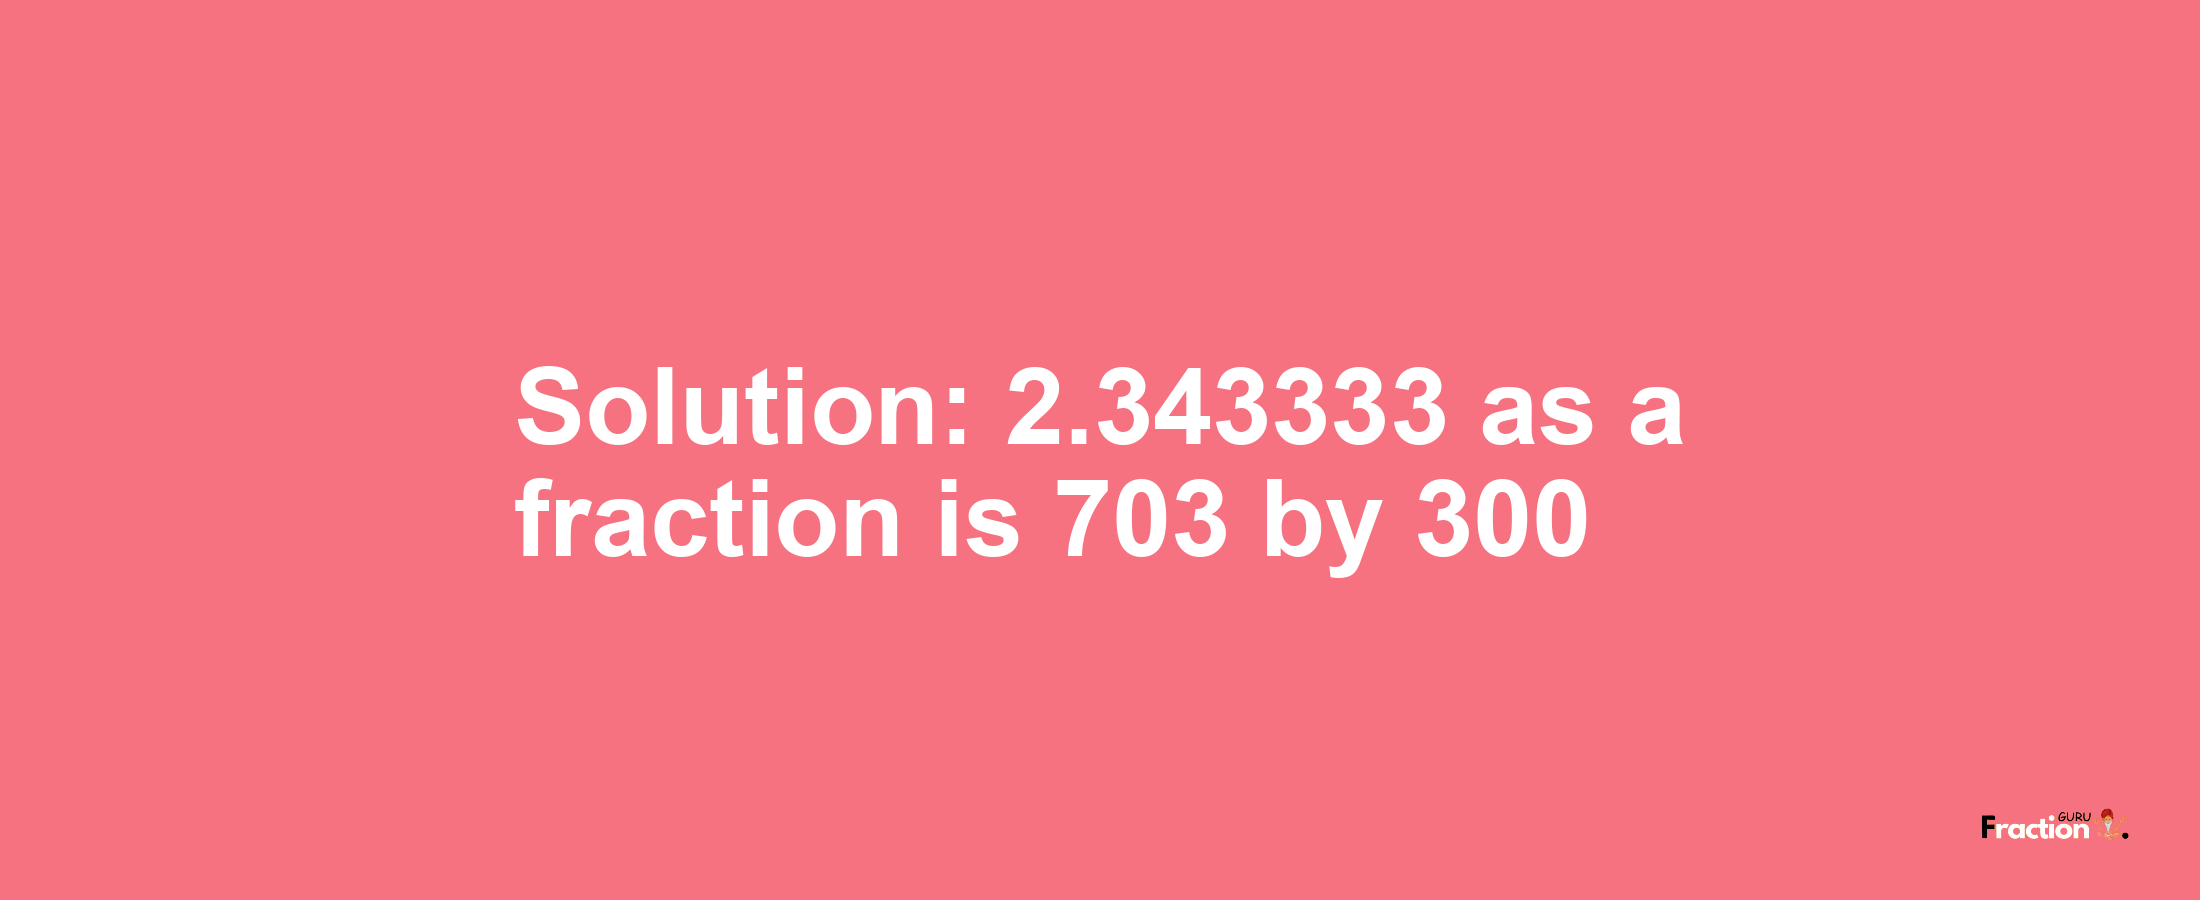 Solution:2.343333 as a fraction is 703/300